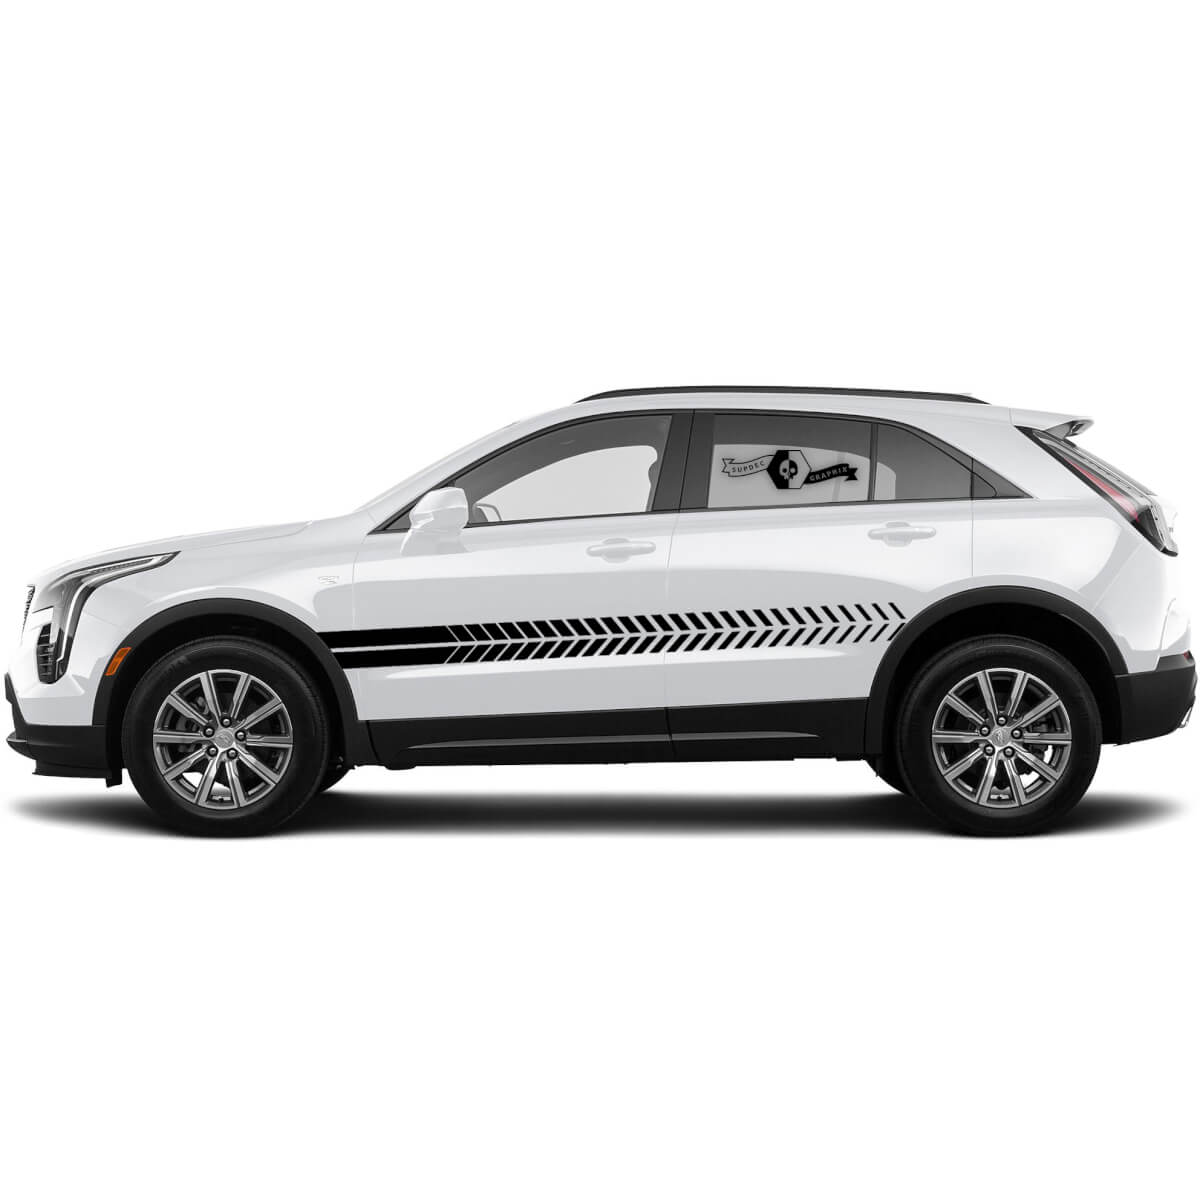 2 New Decal Door Sloping Lines Sticker Lines Stripe for Cadillac XT4